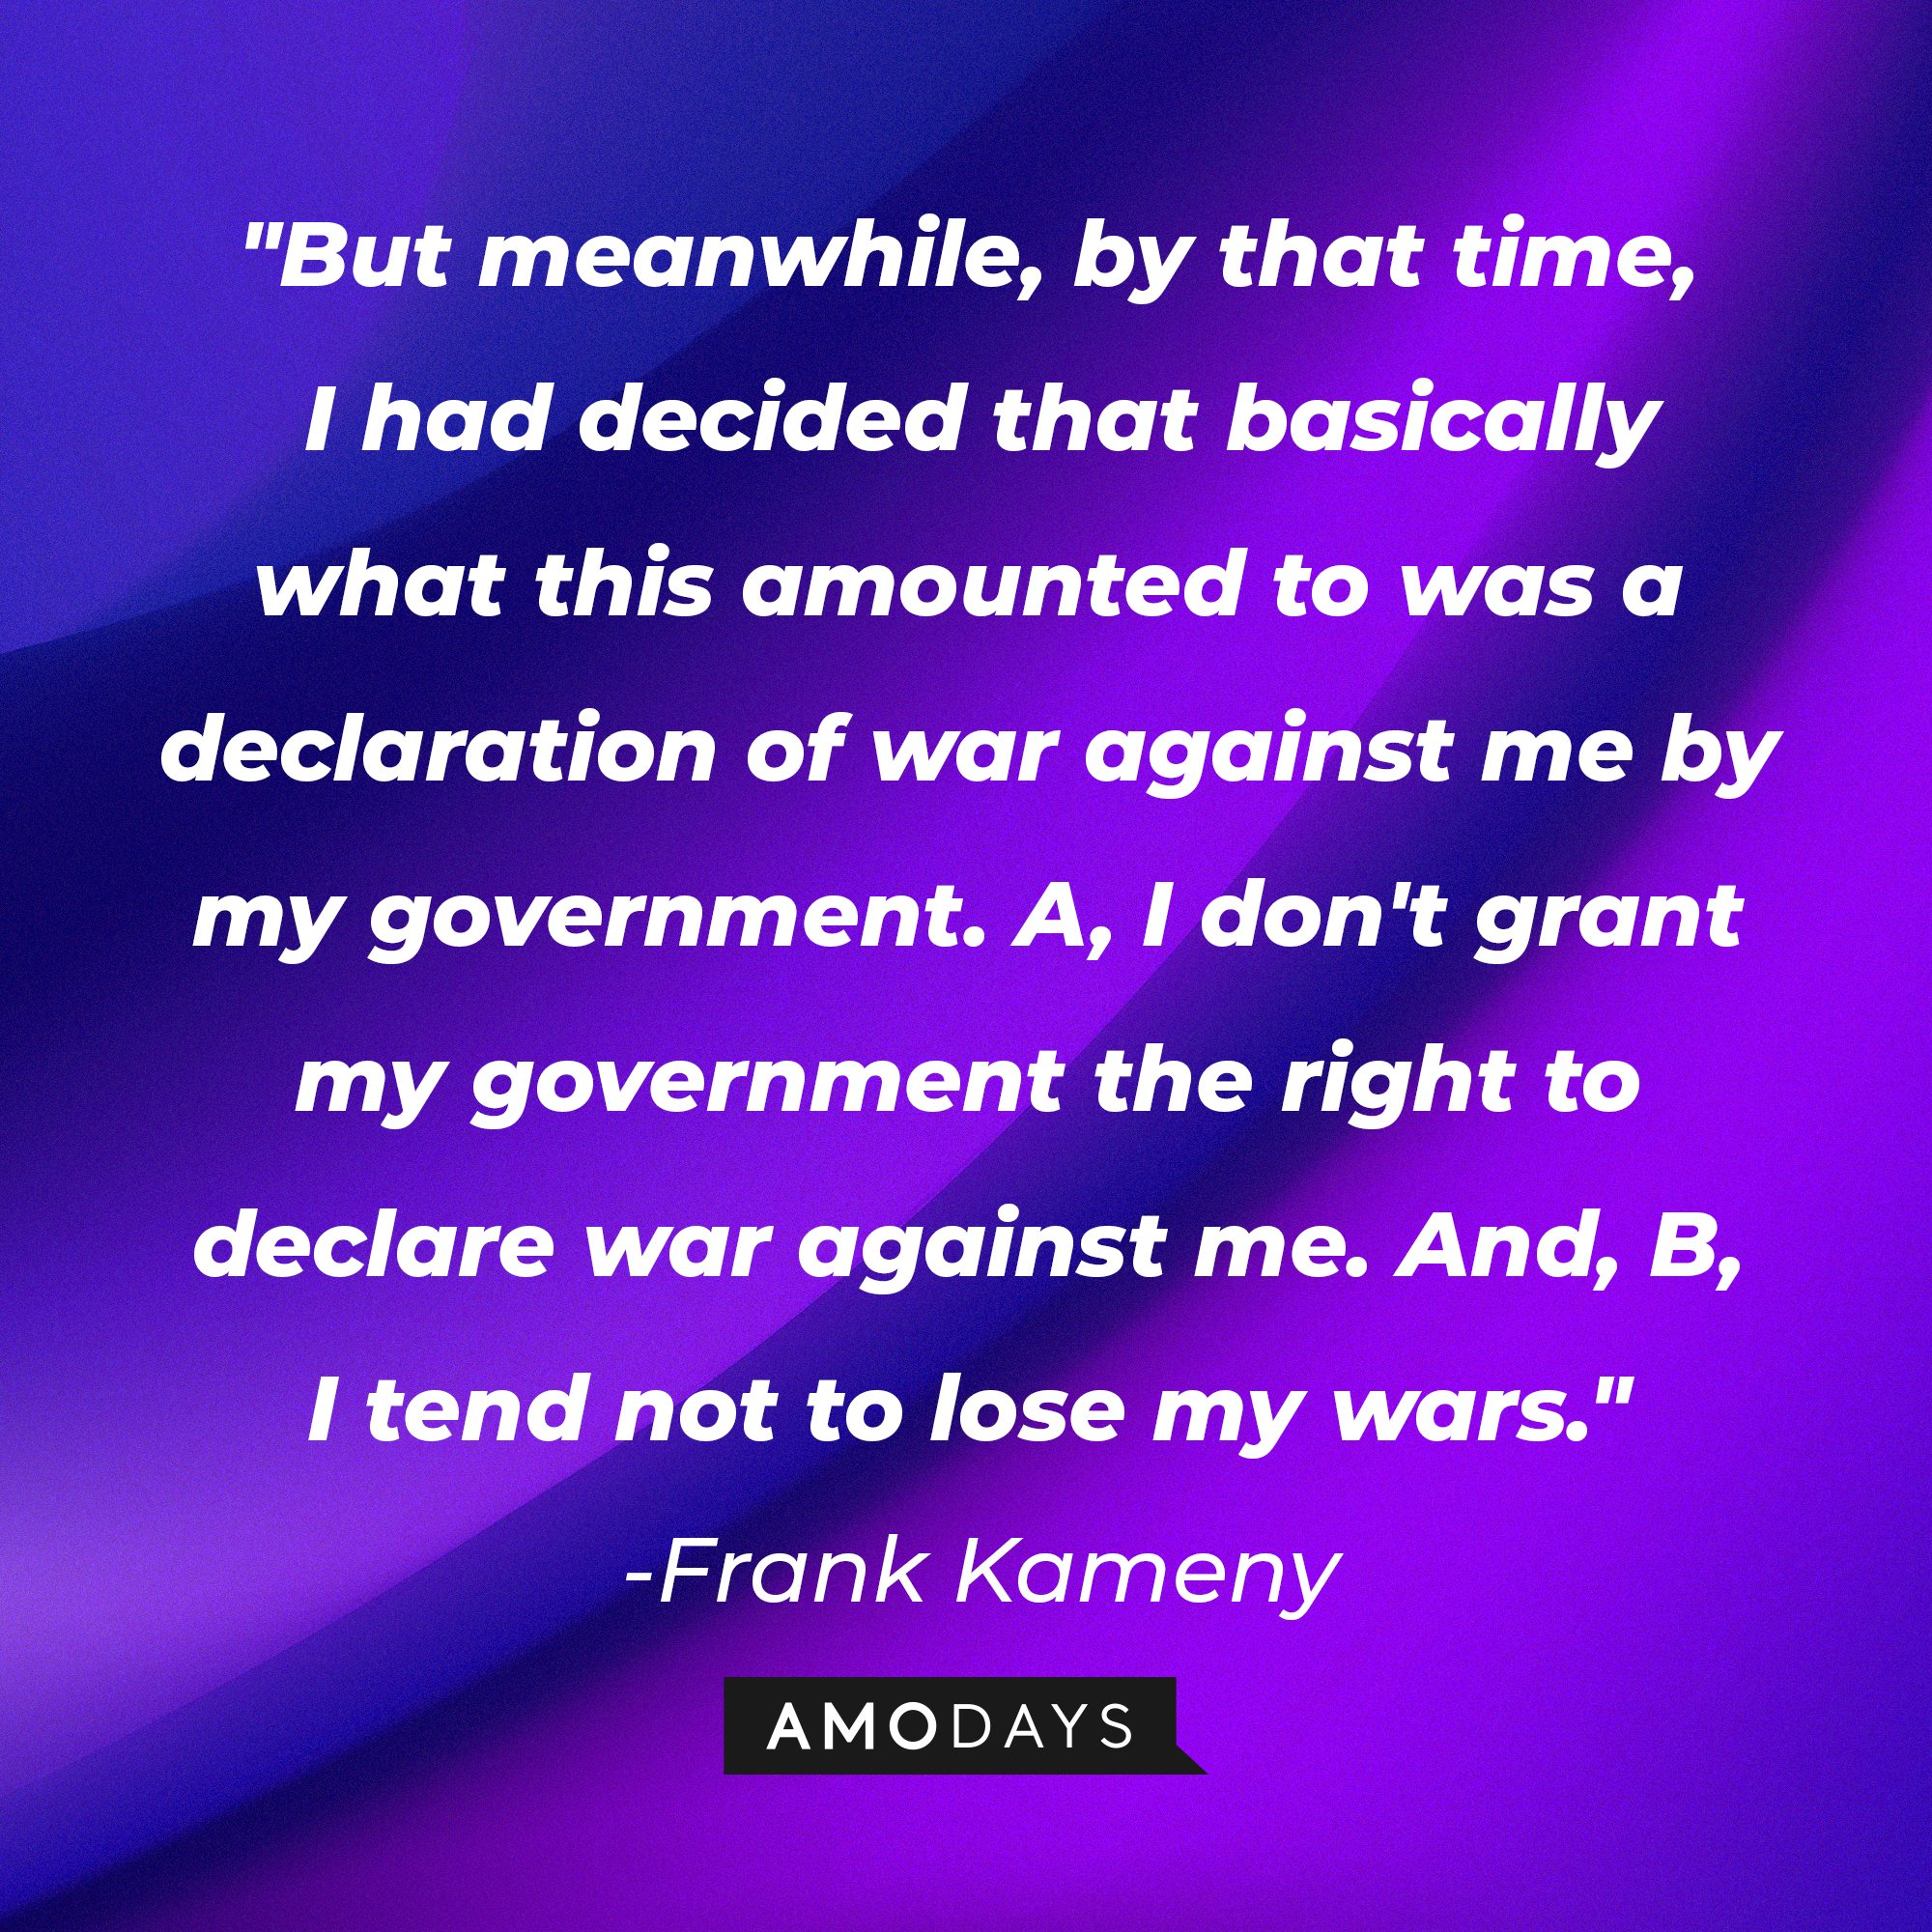 Frank Kameny's quote: "But meanwhile, by that time, I had decided that basically what this amounted to was a declaration of war against me by my government. A, I don't grant my government the right to declare war against me. And, B, I tend not to lose my wars." | Image: AmoDays